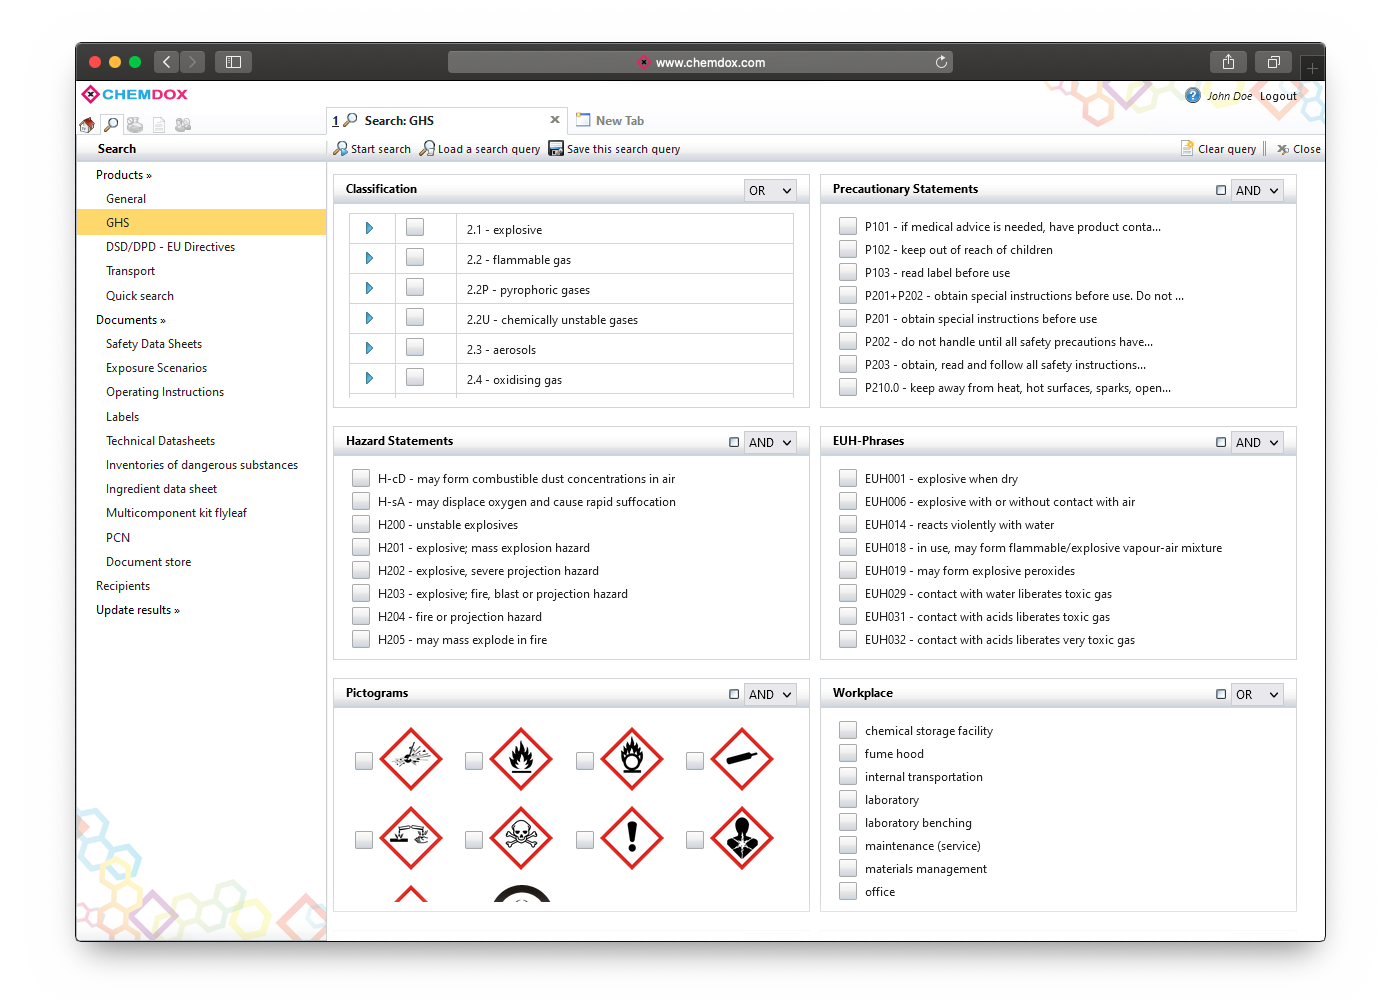 Search the database by specific safety-relevant information